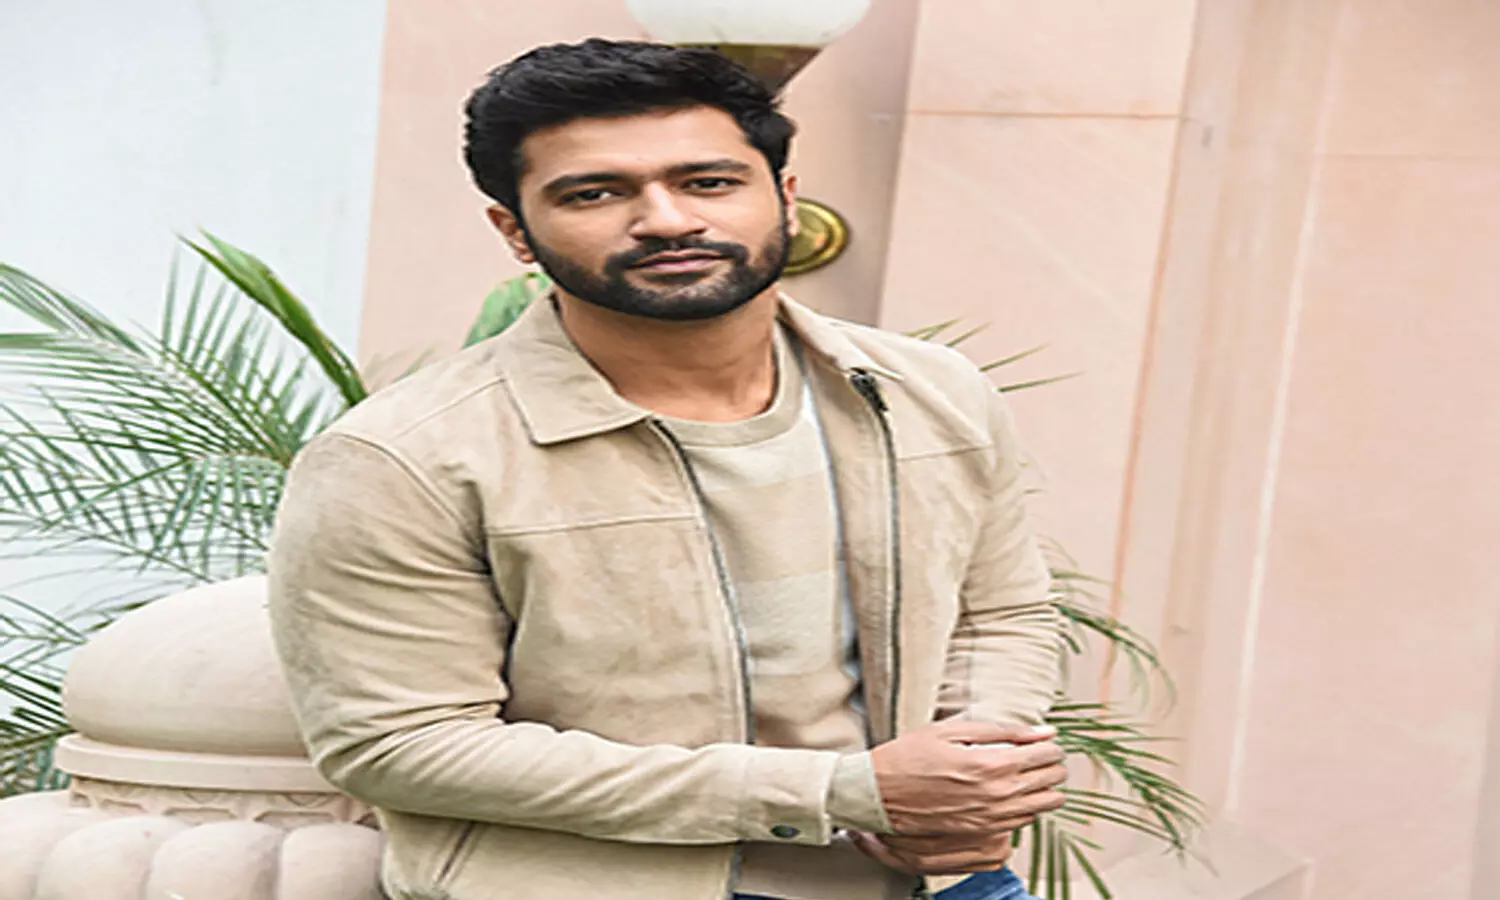 Complaint filed against Vicky Kaushal for allegedly using fake number plate in movie with Sara Ali Khan